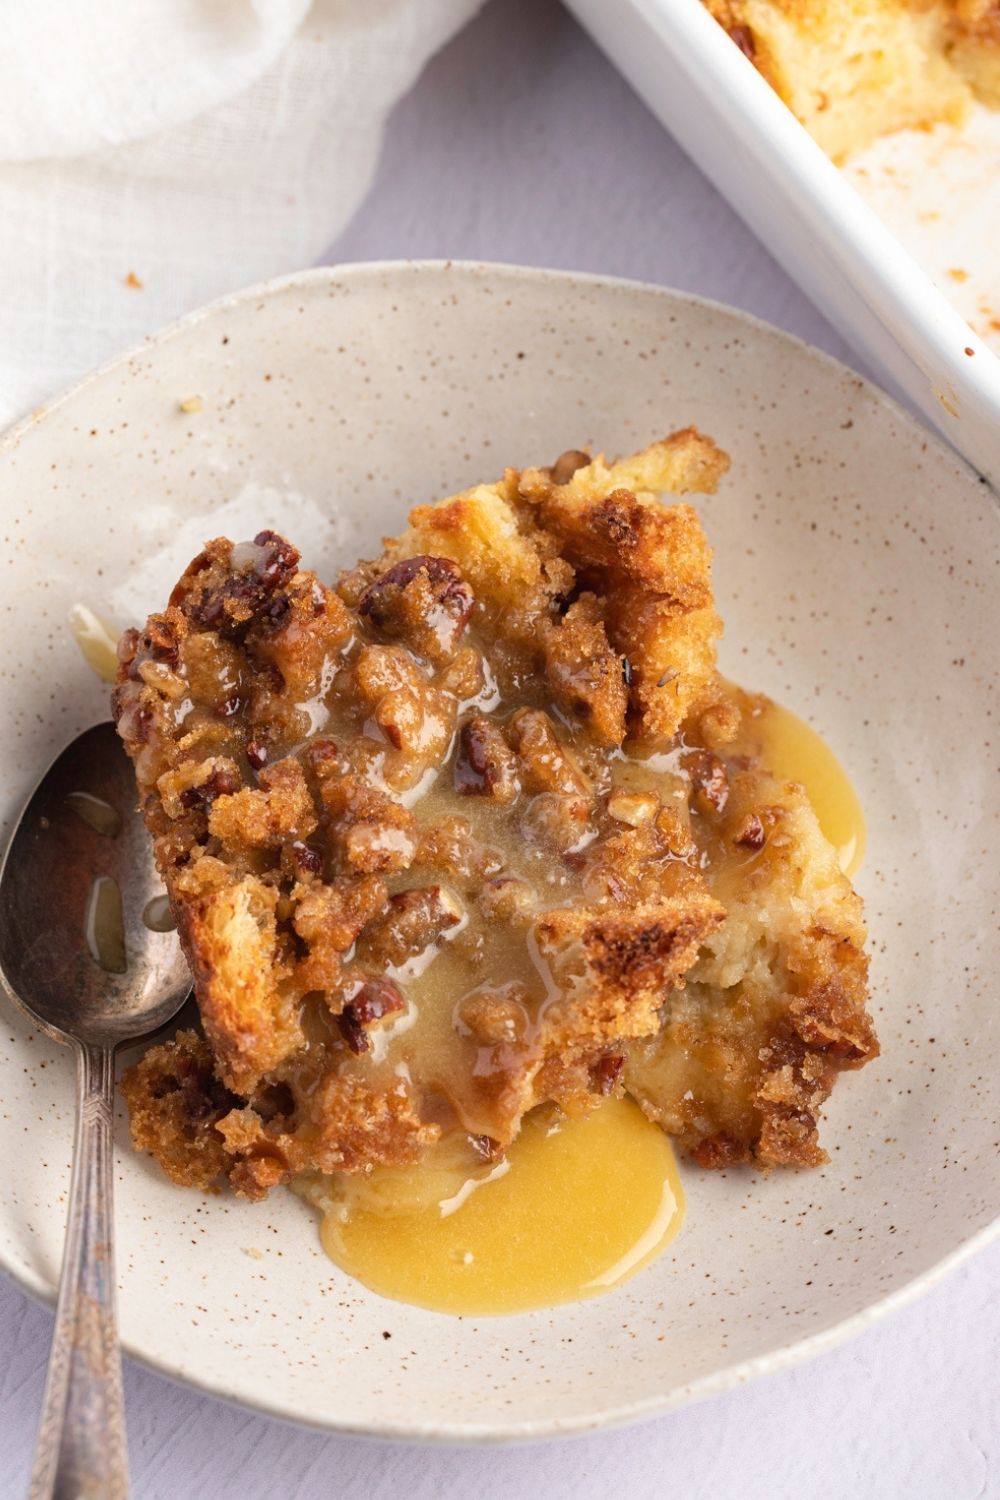 The Best Paula Deen Bread Pudding (Copycat) featuring Bread Pudding Loaded with Sweet Custard and Butter in a Dish with a Spoon